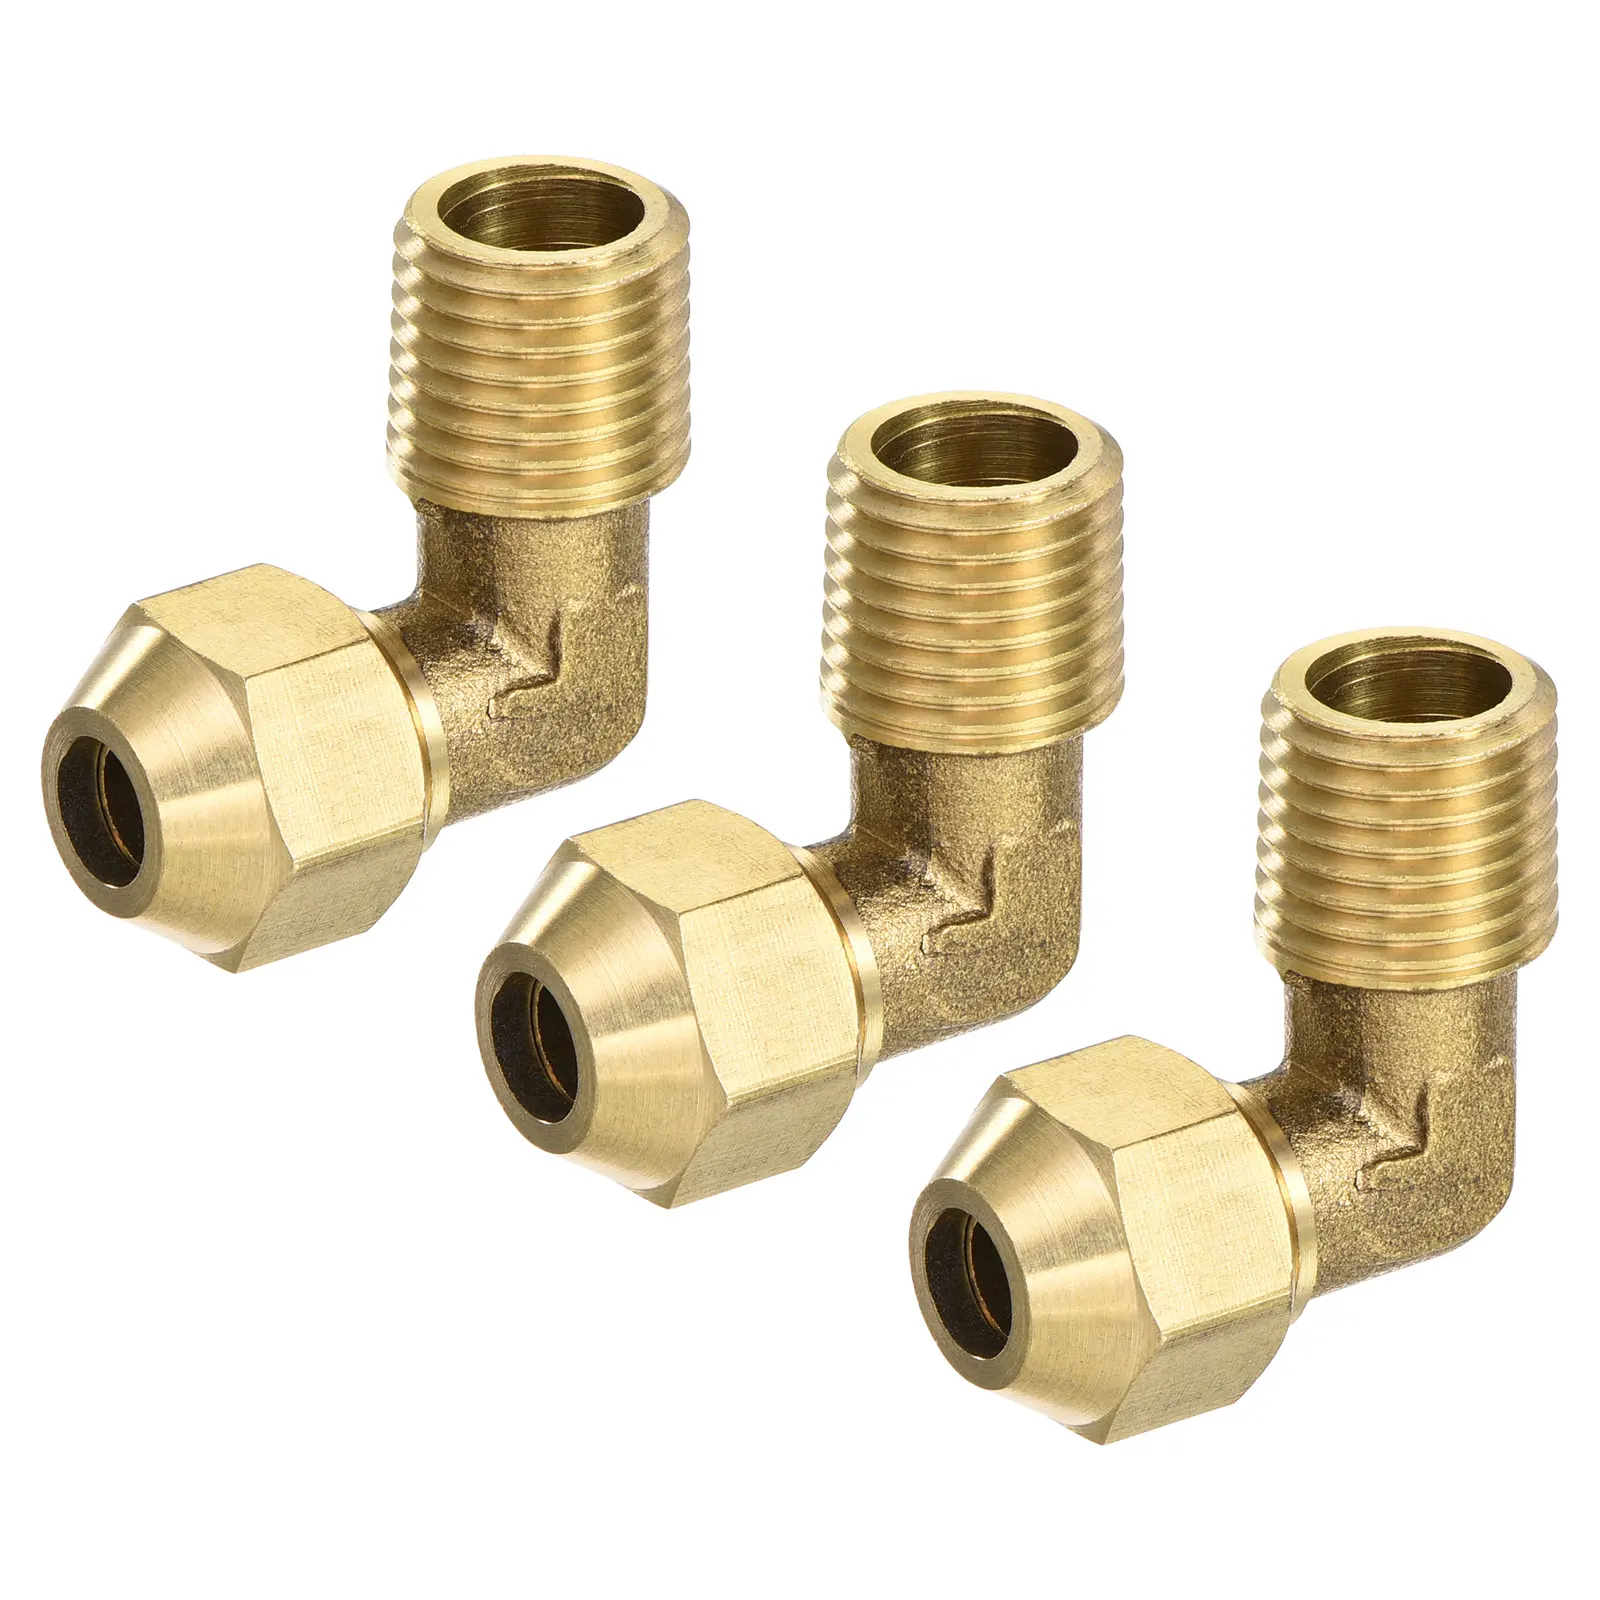 

uxcell Brass Compression Tube Fitting 8mm Tube OD to 1/8PT Male Thread Elbow Fittings Pack of 3